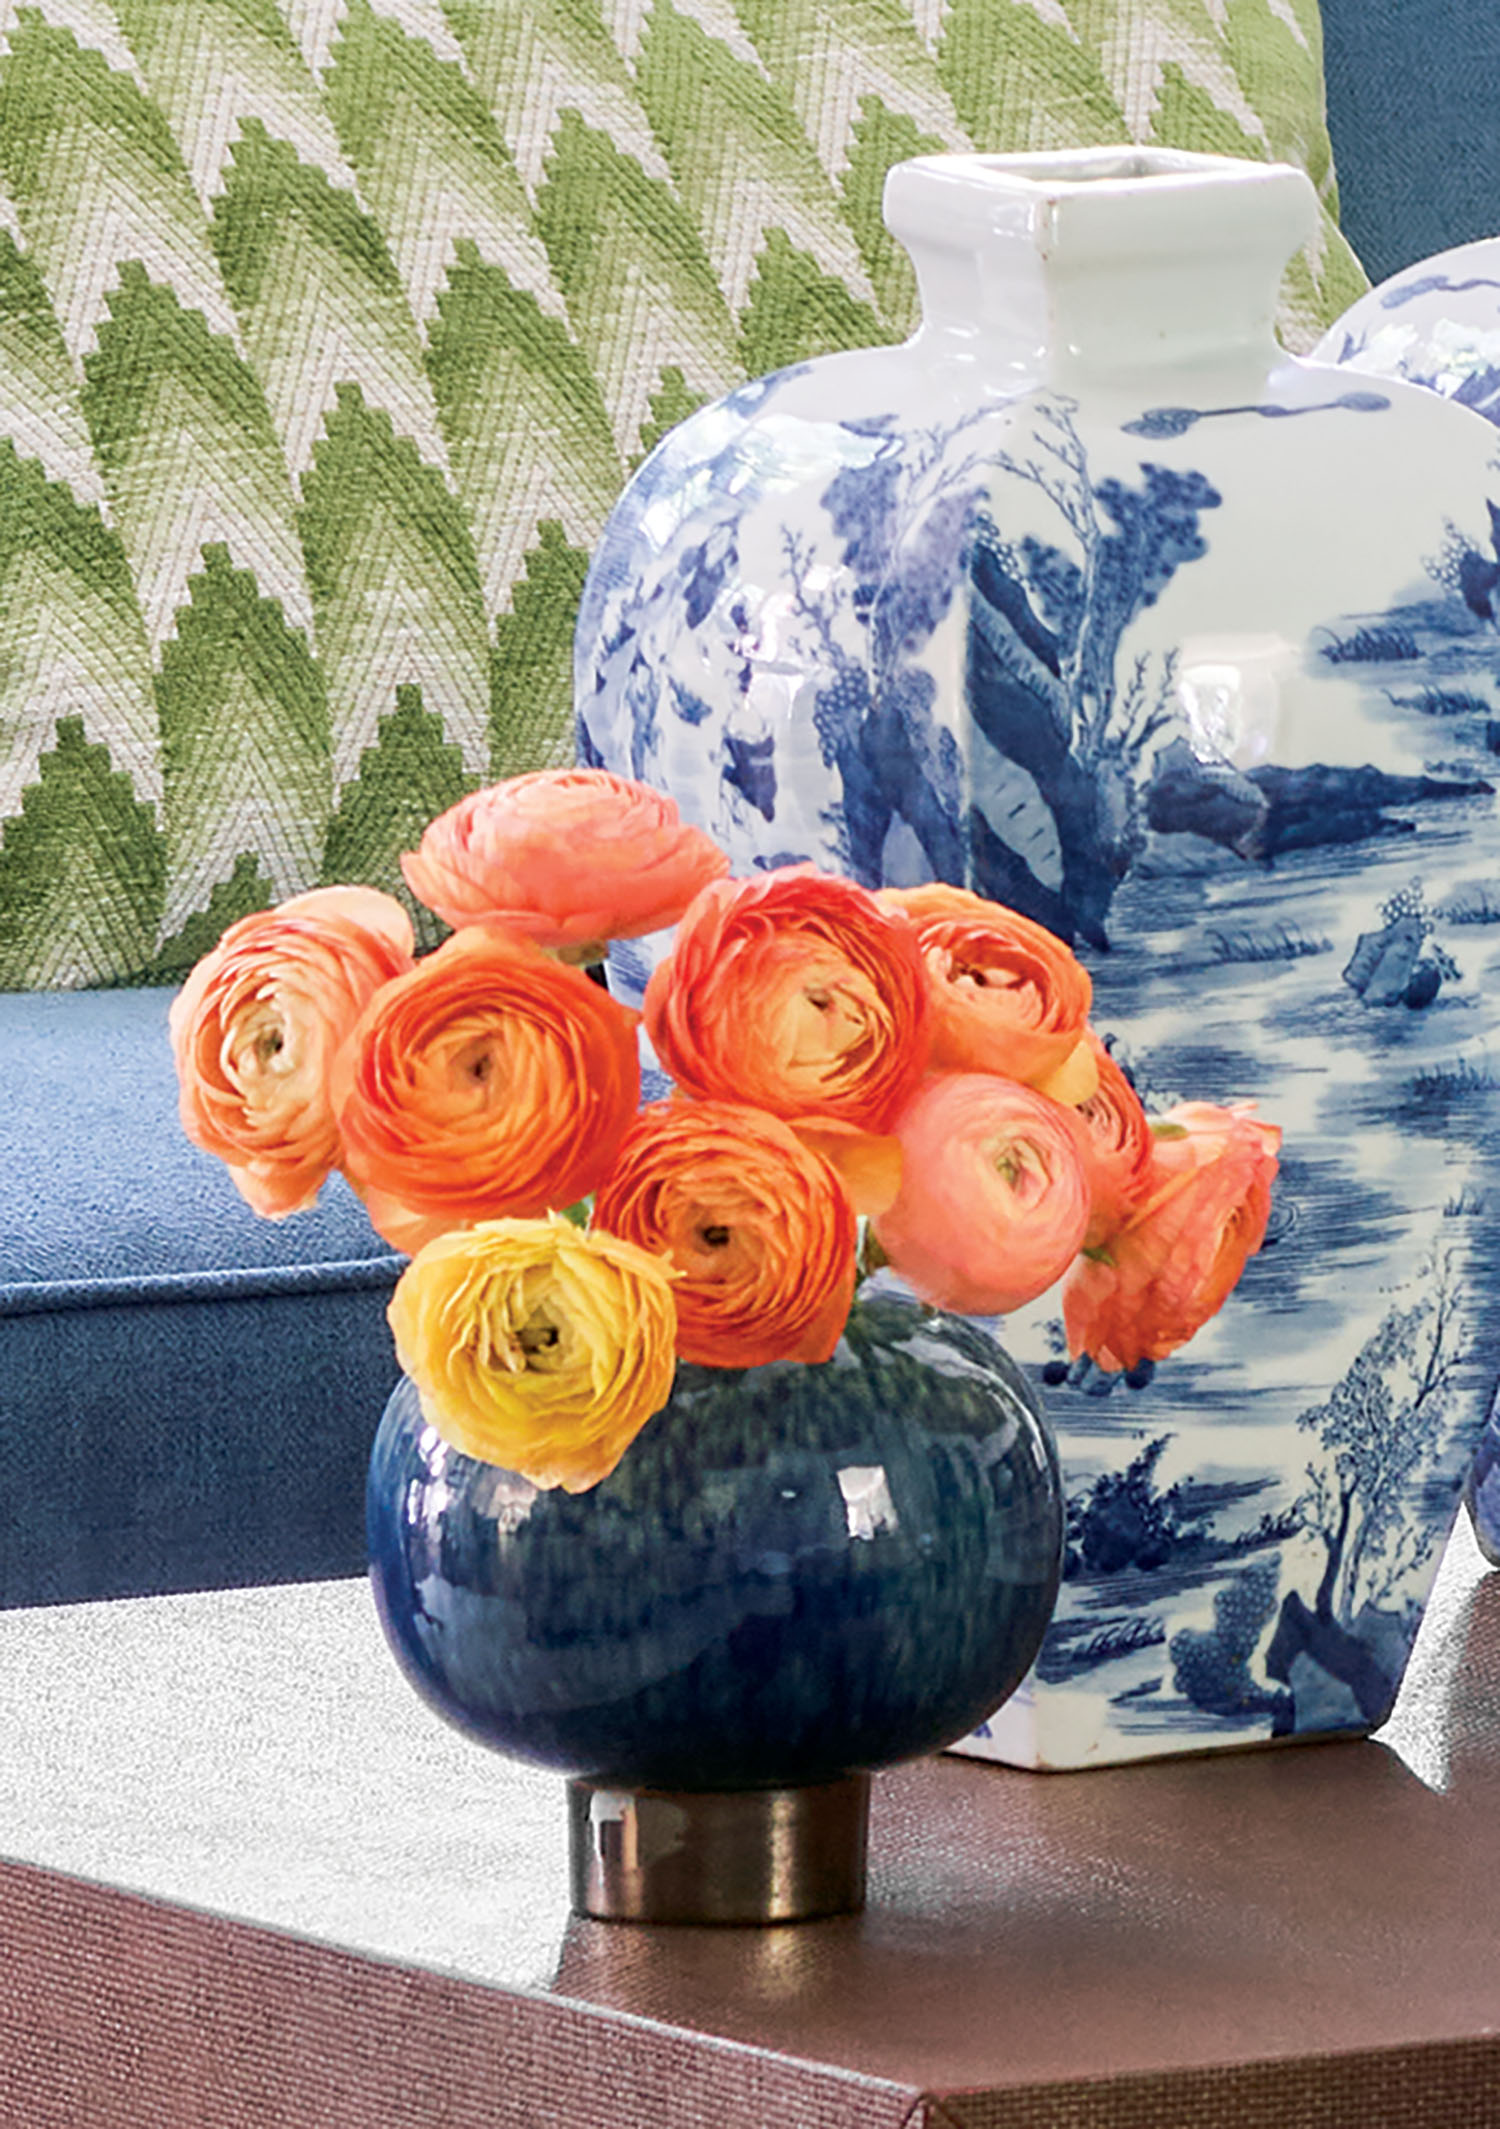 Bright orange ranunculus sit next to blue and white vases on a coffee table.